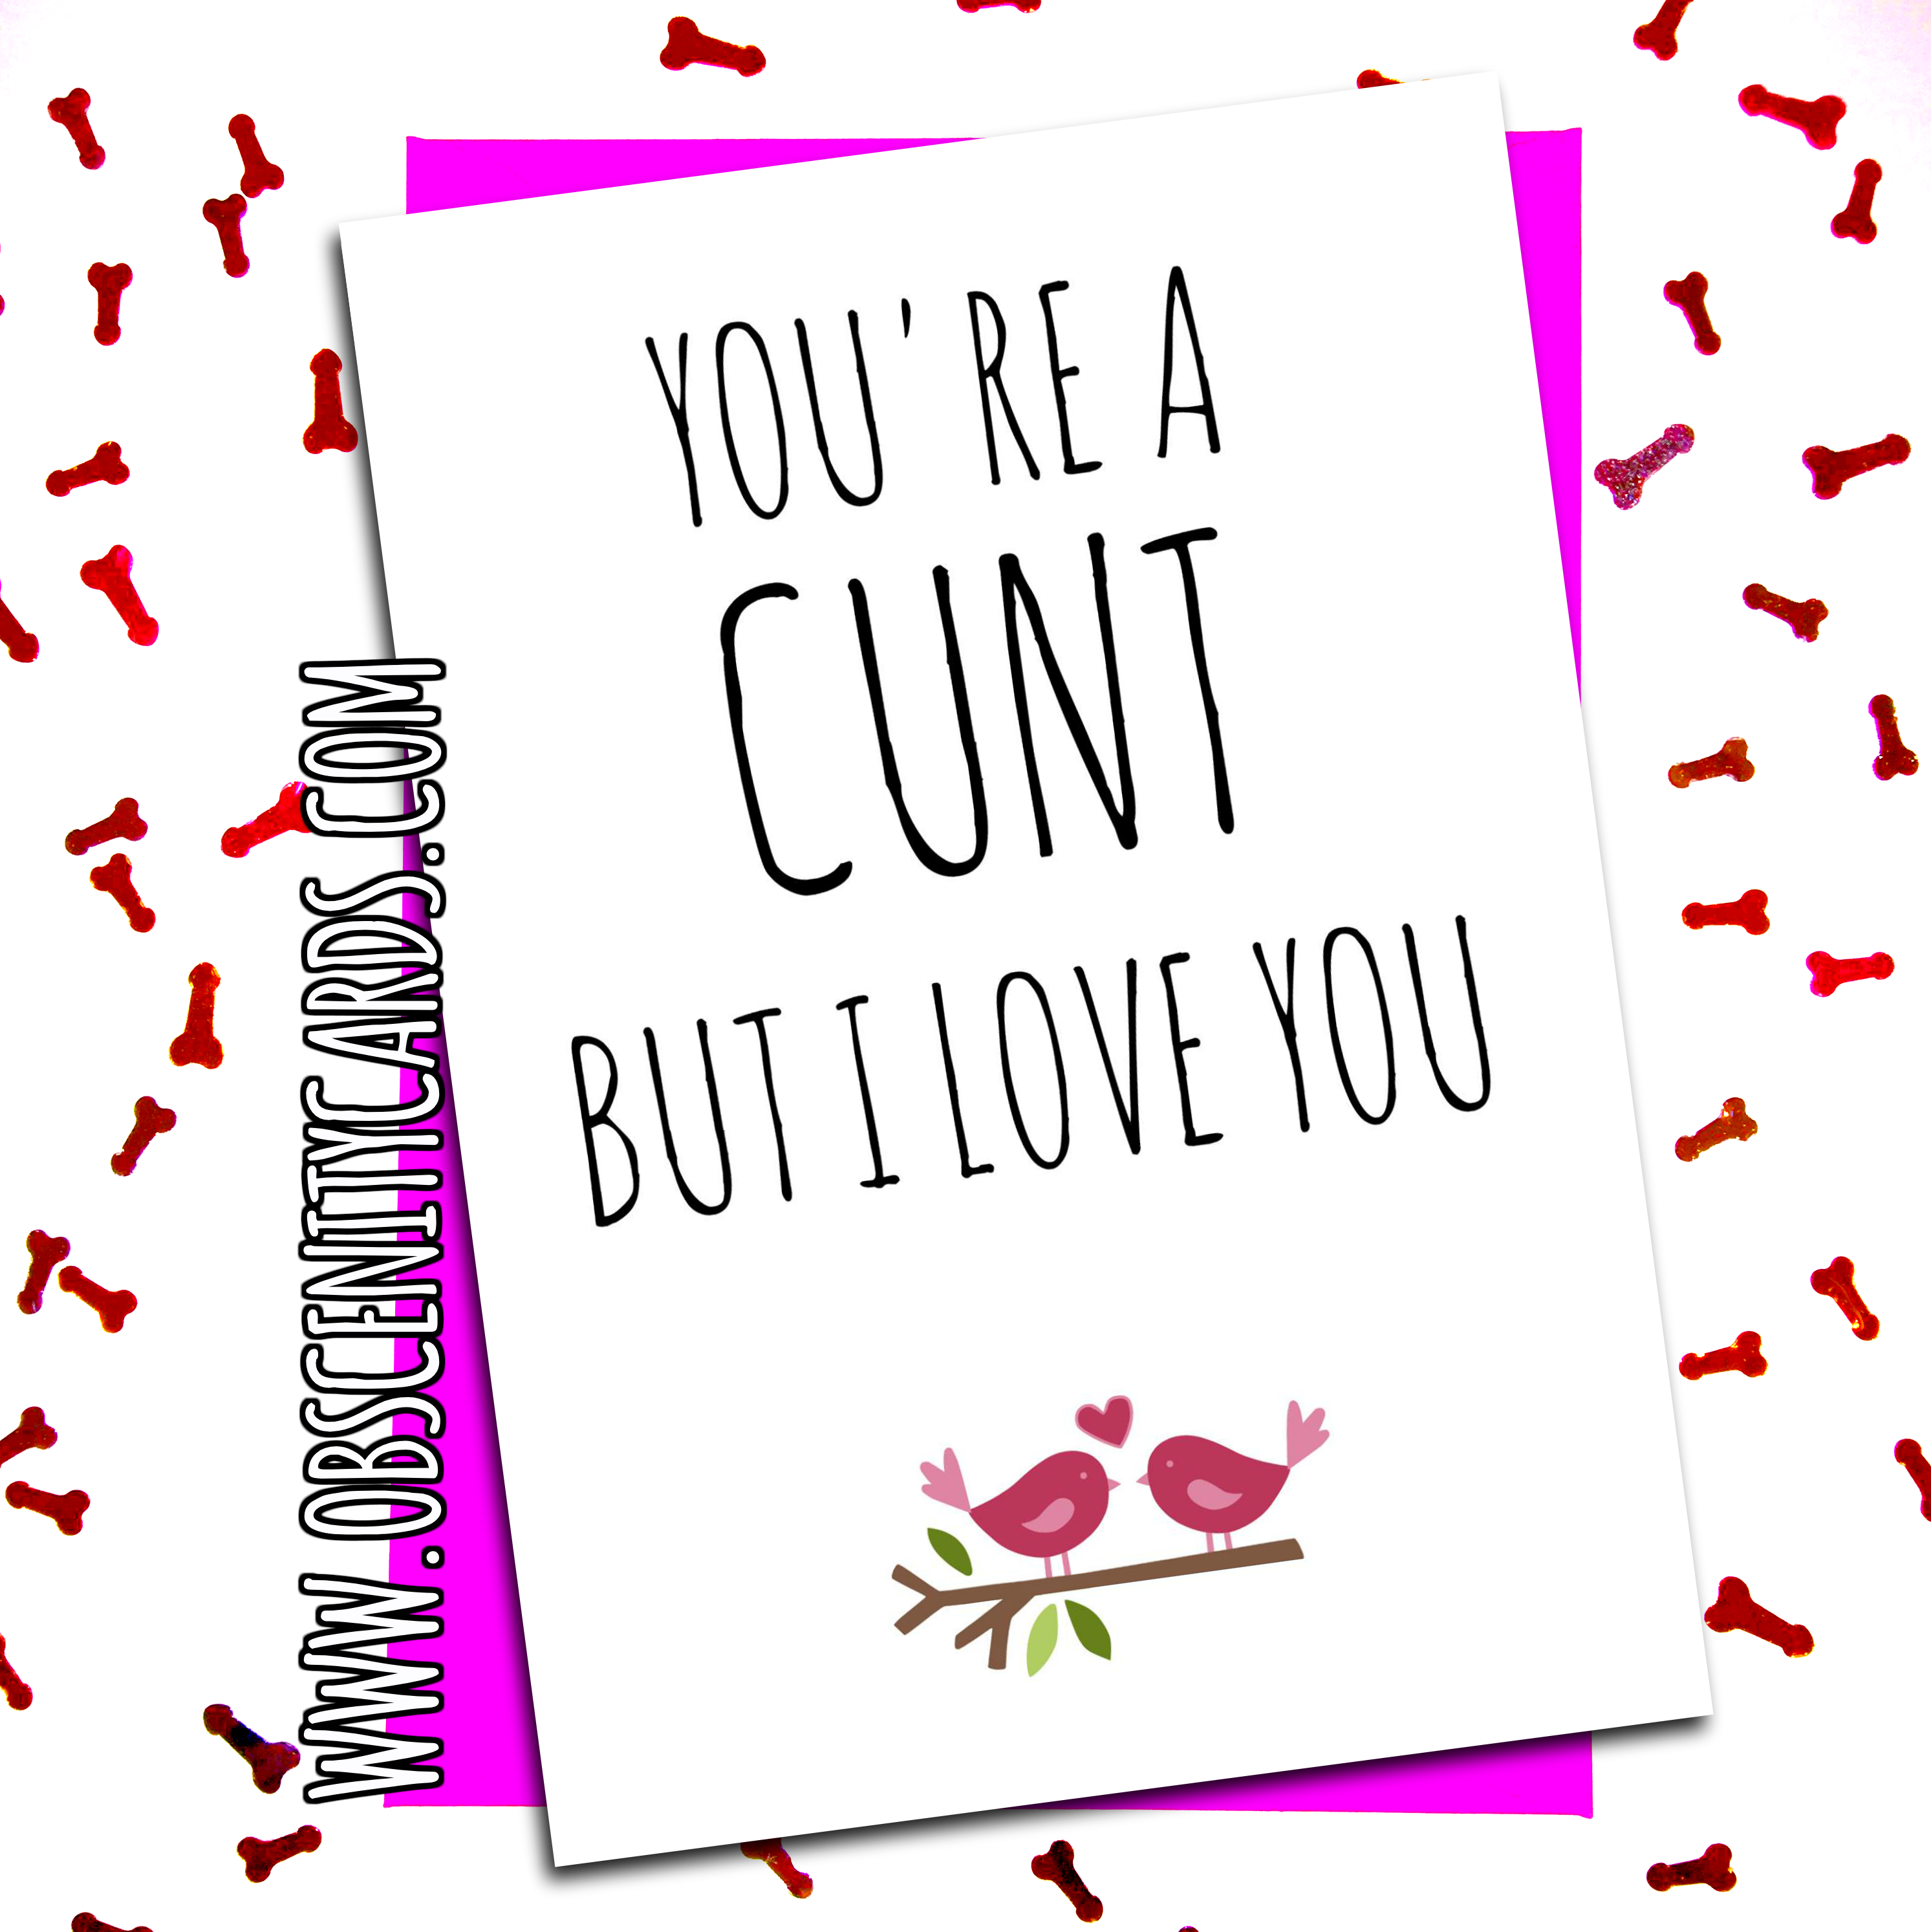 YOU'RE A CUNT, BUT I LOVE YOU VALENTINE, ANNIVERSARY CARD . Obscene funny offensive birthday cards by Obscenity cards. Obscene Funny Cards, Pens, Party Hats, Key rings, Magnets, Lighters & Loads More!